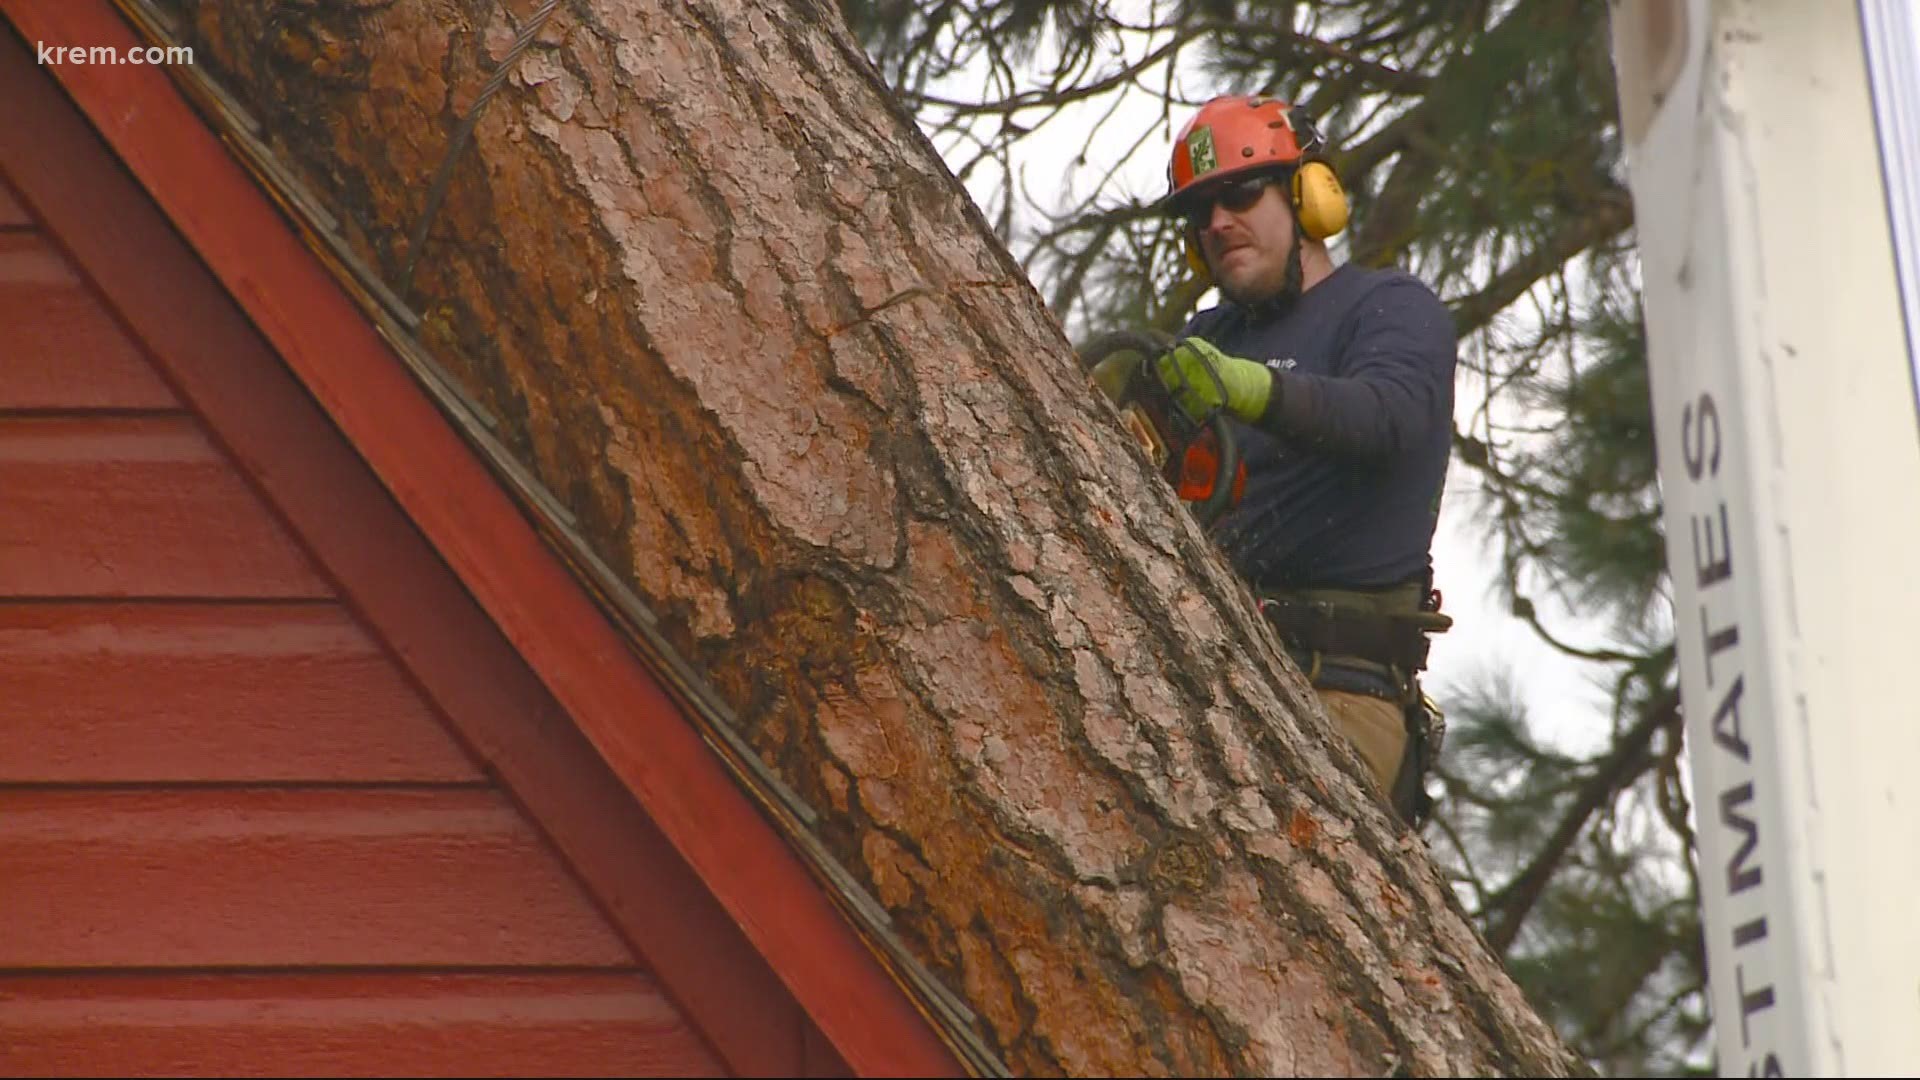 Fort Sherman's "Little Red" Chapel in Coeur d'Alene was "bowing from the impact" of a fallen tree, a spokesperson for the Museum of North Idaho said.